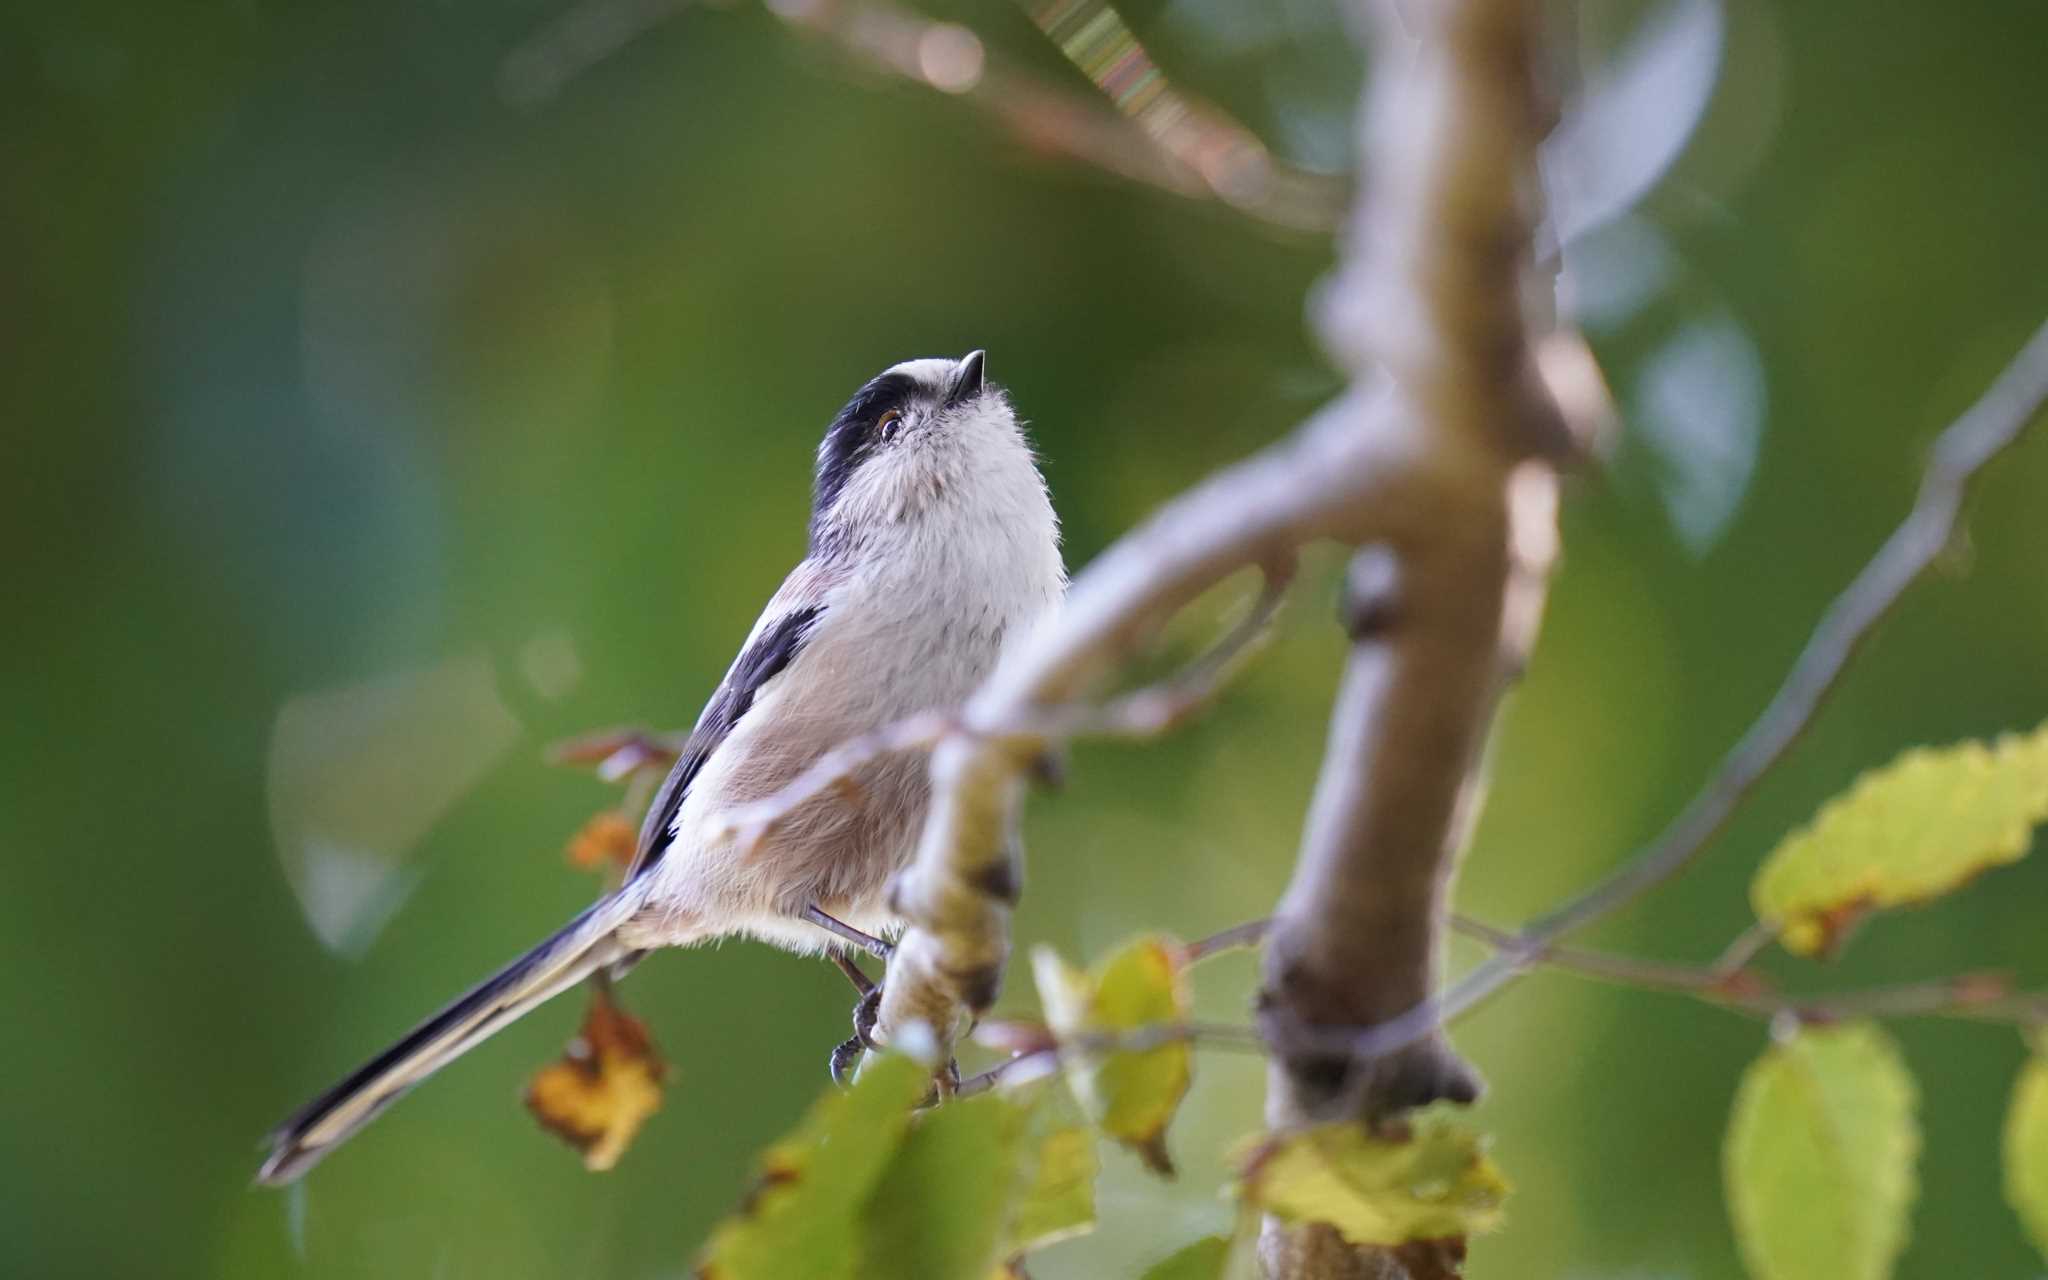 Photo of Long-tailed Tit at 東京都多摩地域 by Orion-HAS